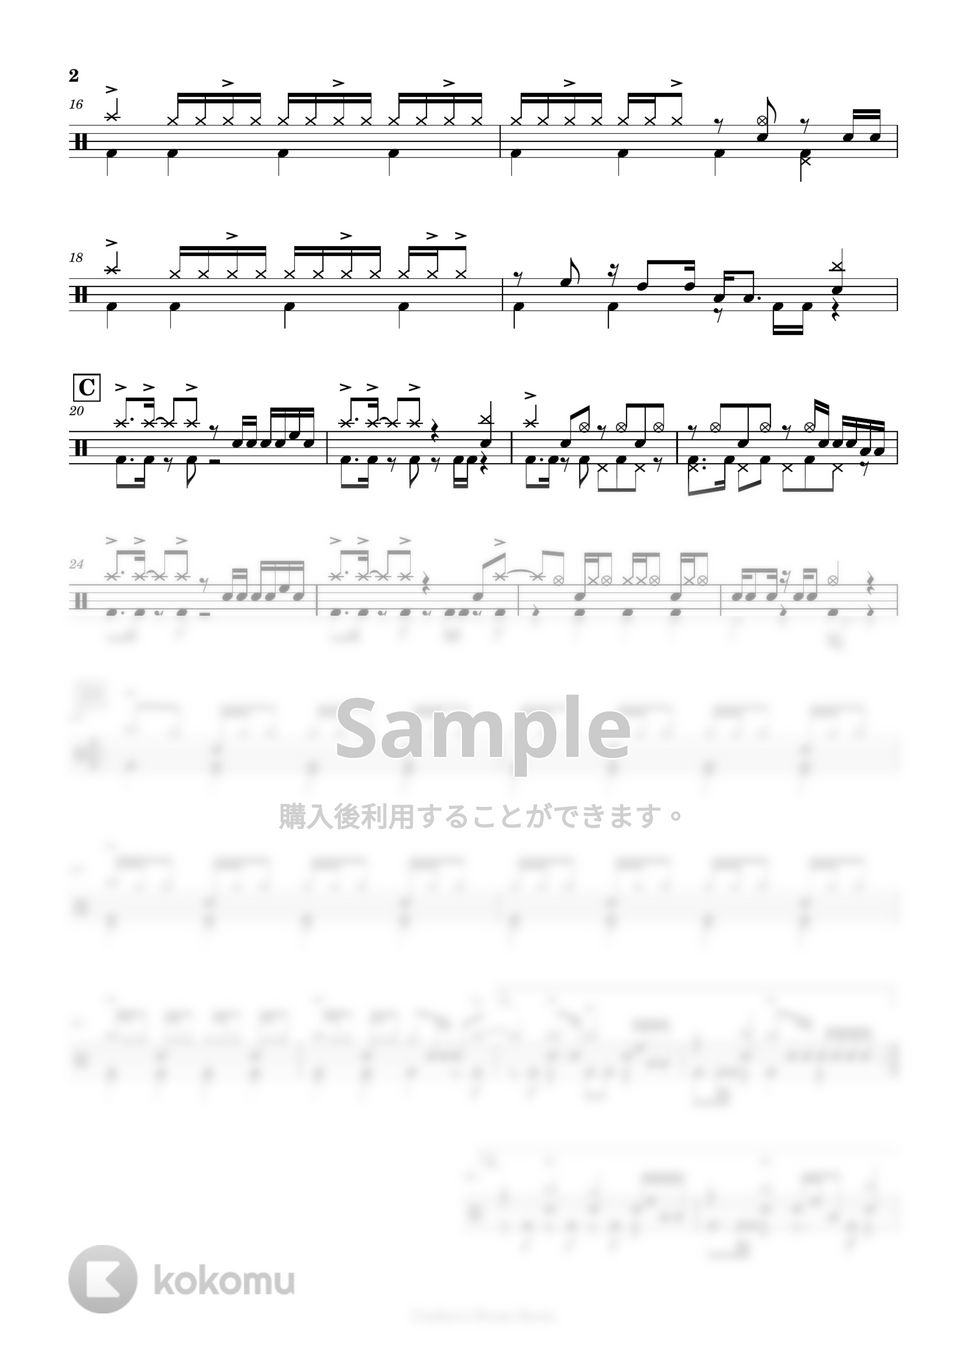 Ado - 阿修羅ちゃん by Cookie's Drum Score